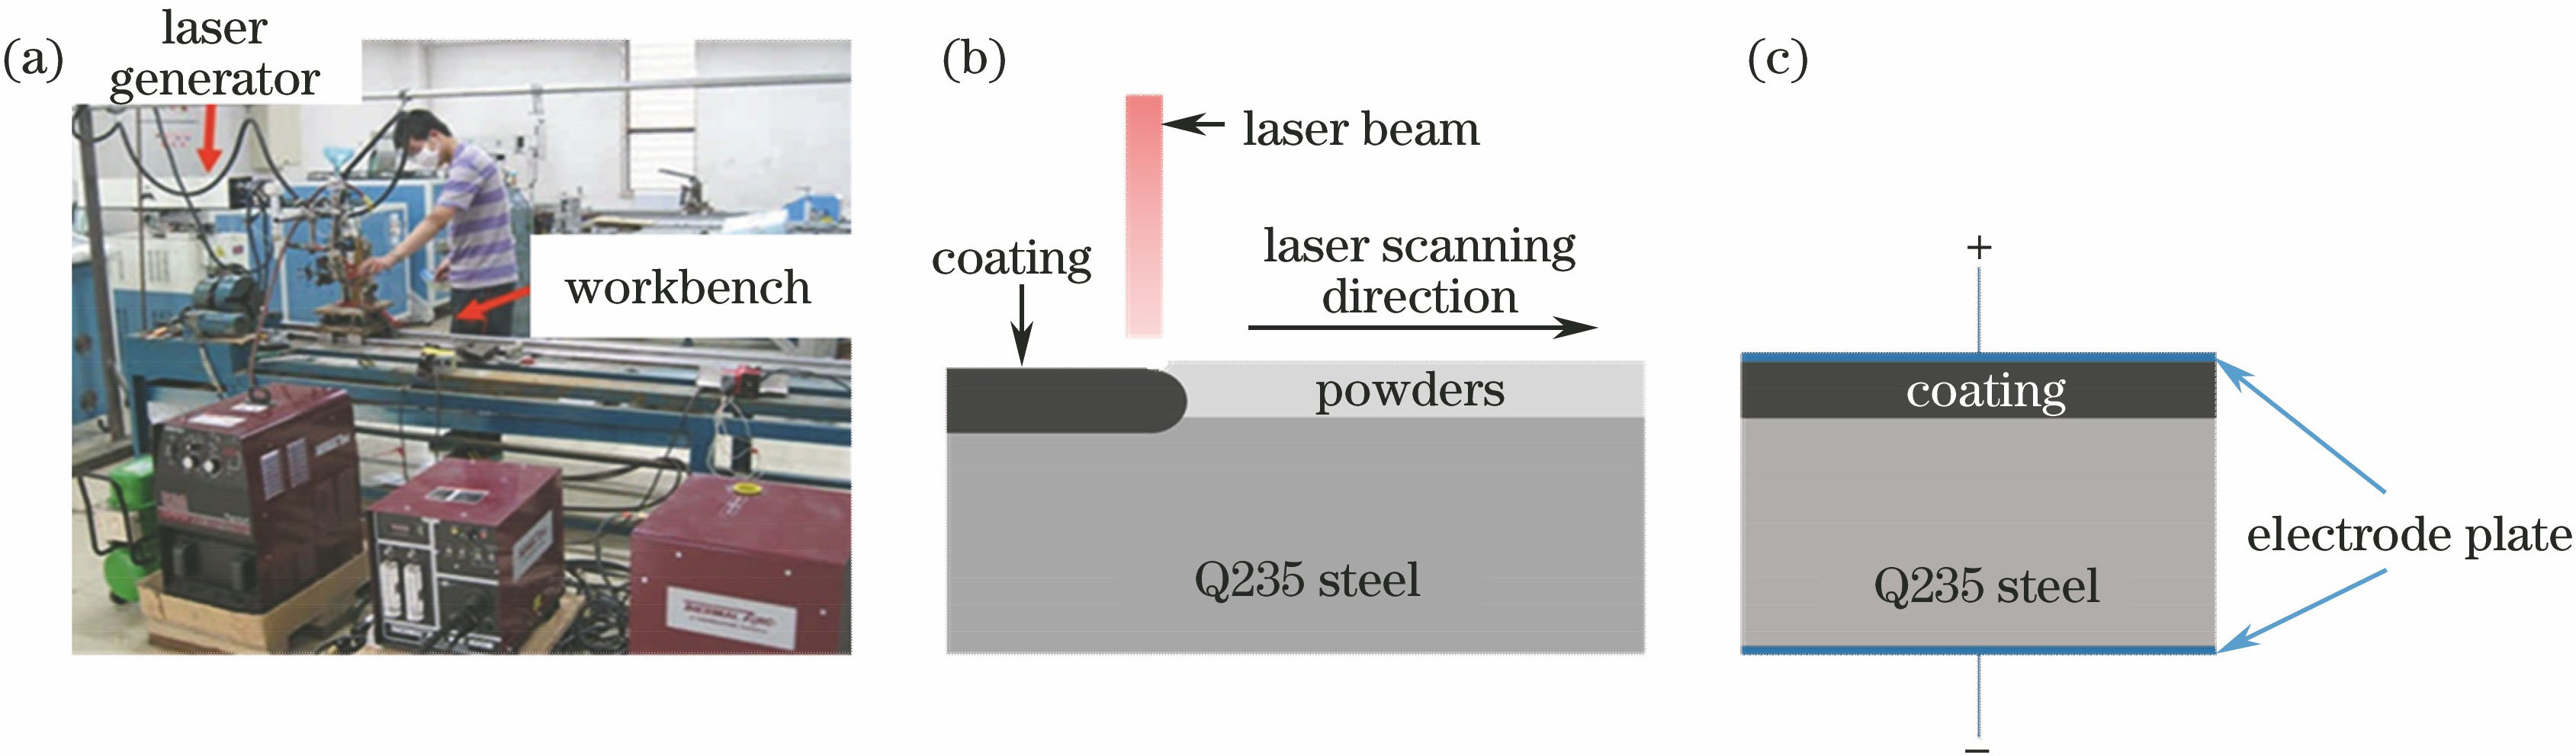 (a) Laser cladding equipment; (b) schematic of coating fabrication; (c) schematic of pulsed current processing